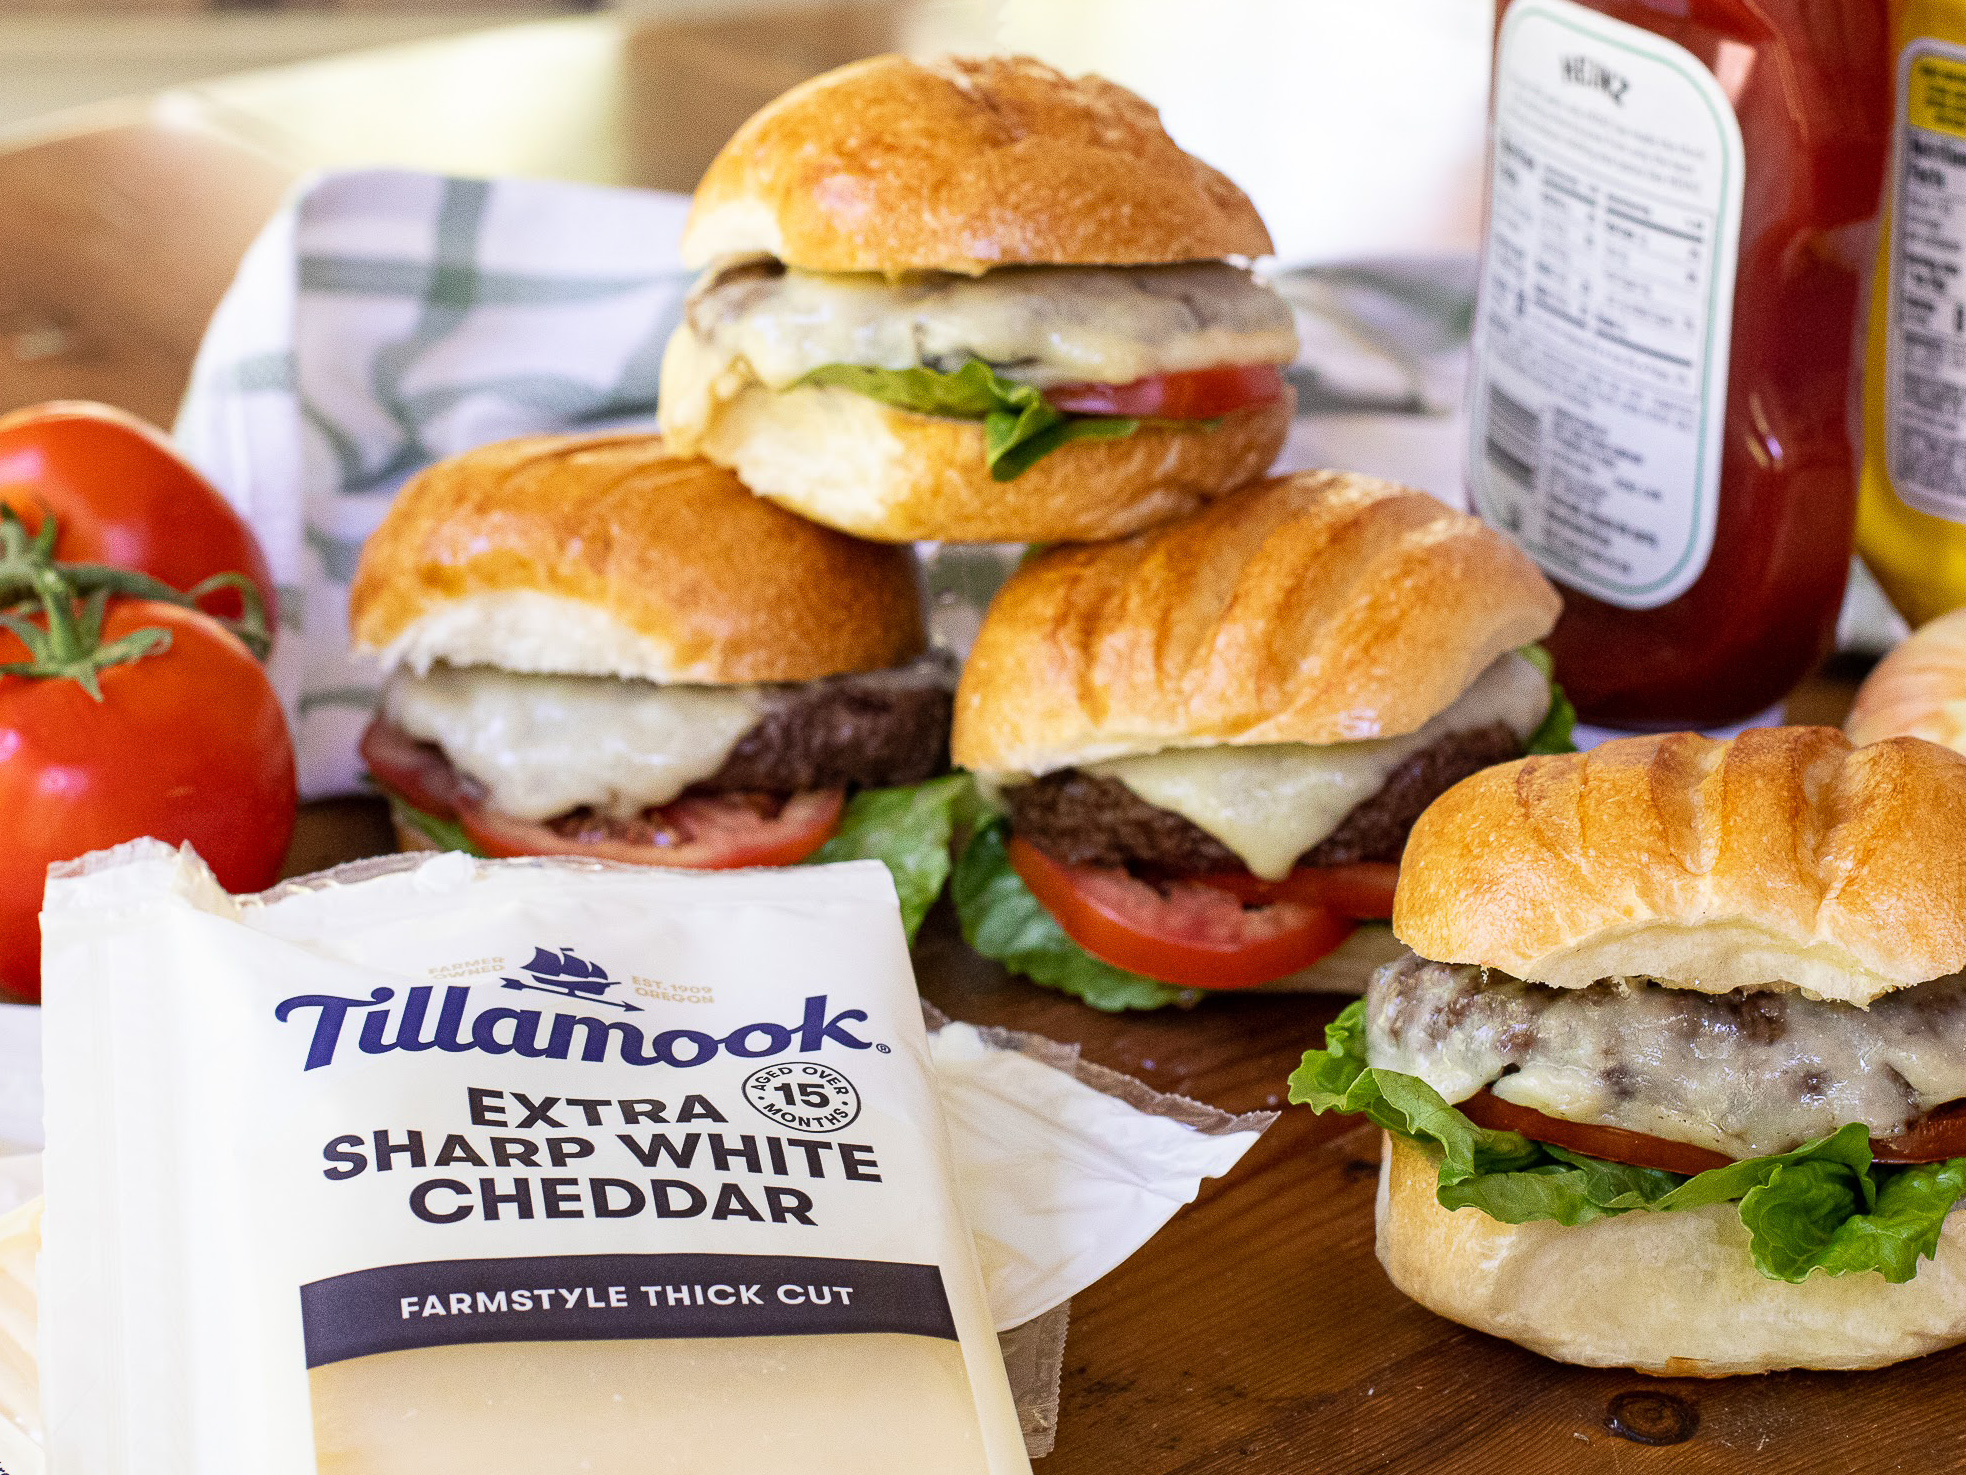 Don't Miss Great Savings On Tillamook Cheese & Sara Lee Bread At Publix on I Heart Publix